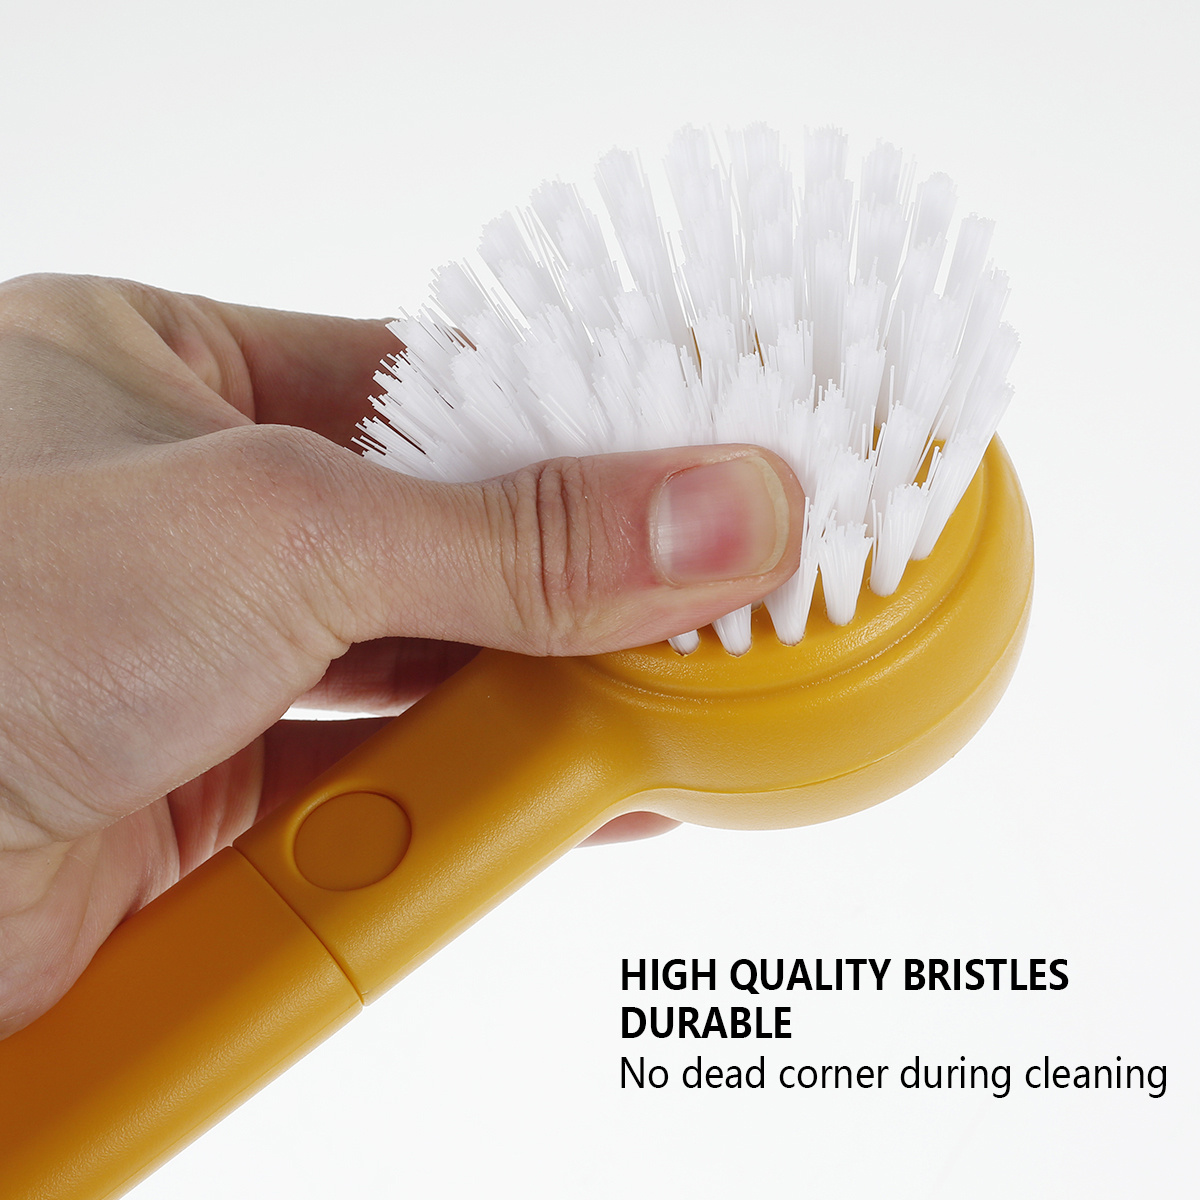 White Fruit And Vegetable Cleaning Brush